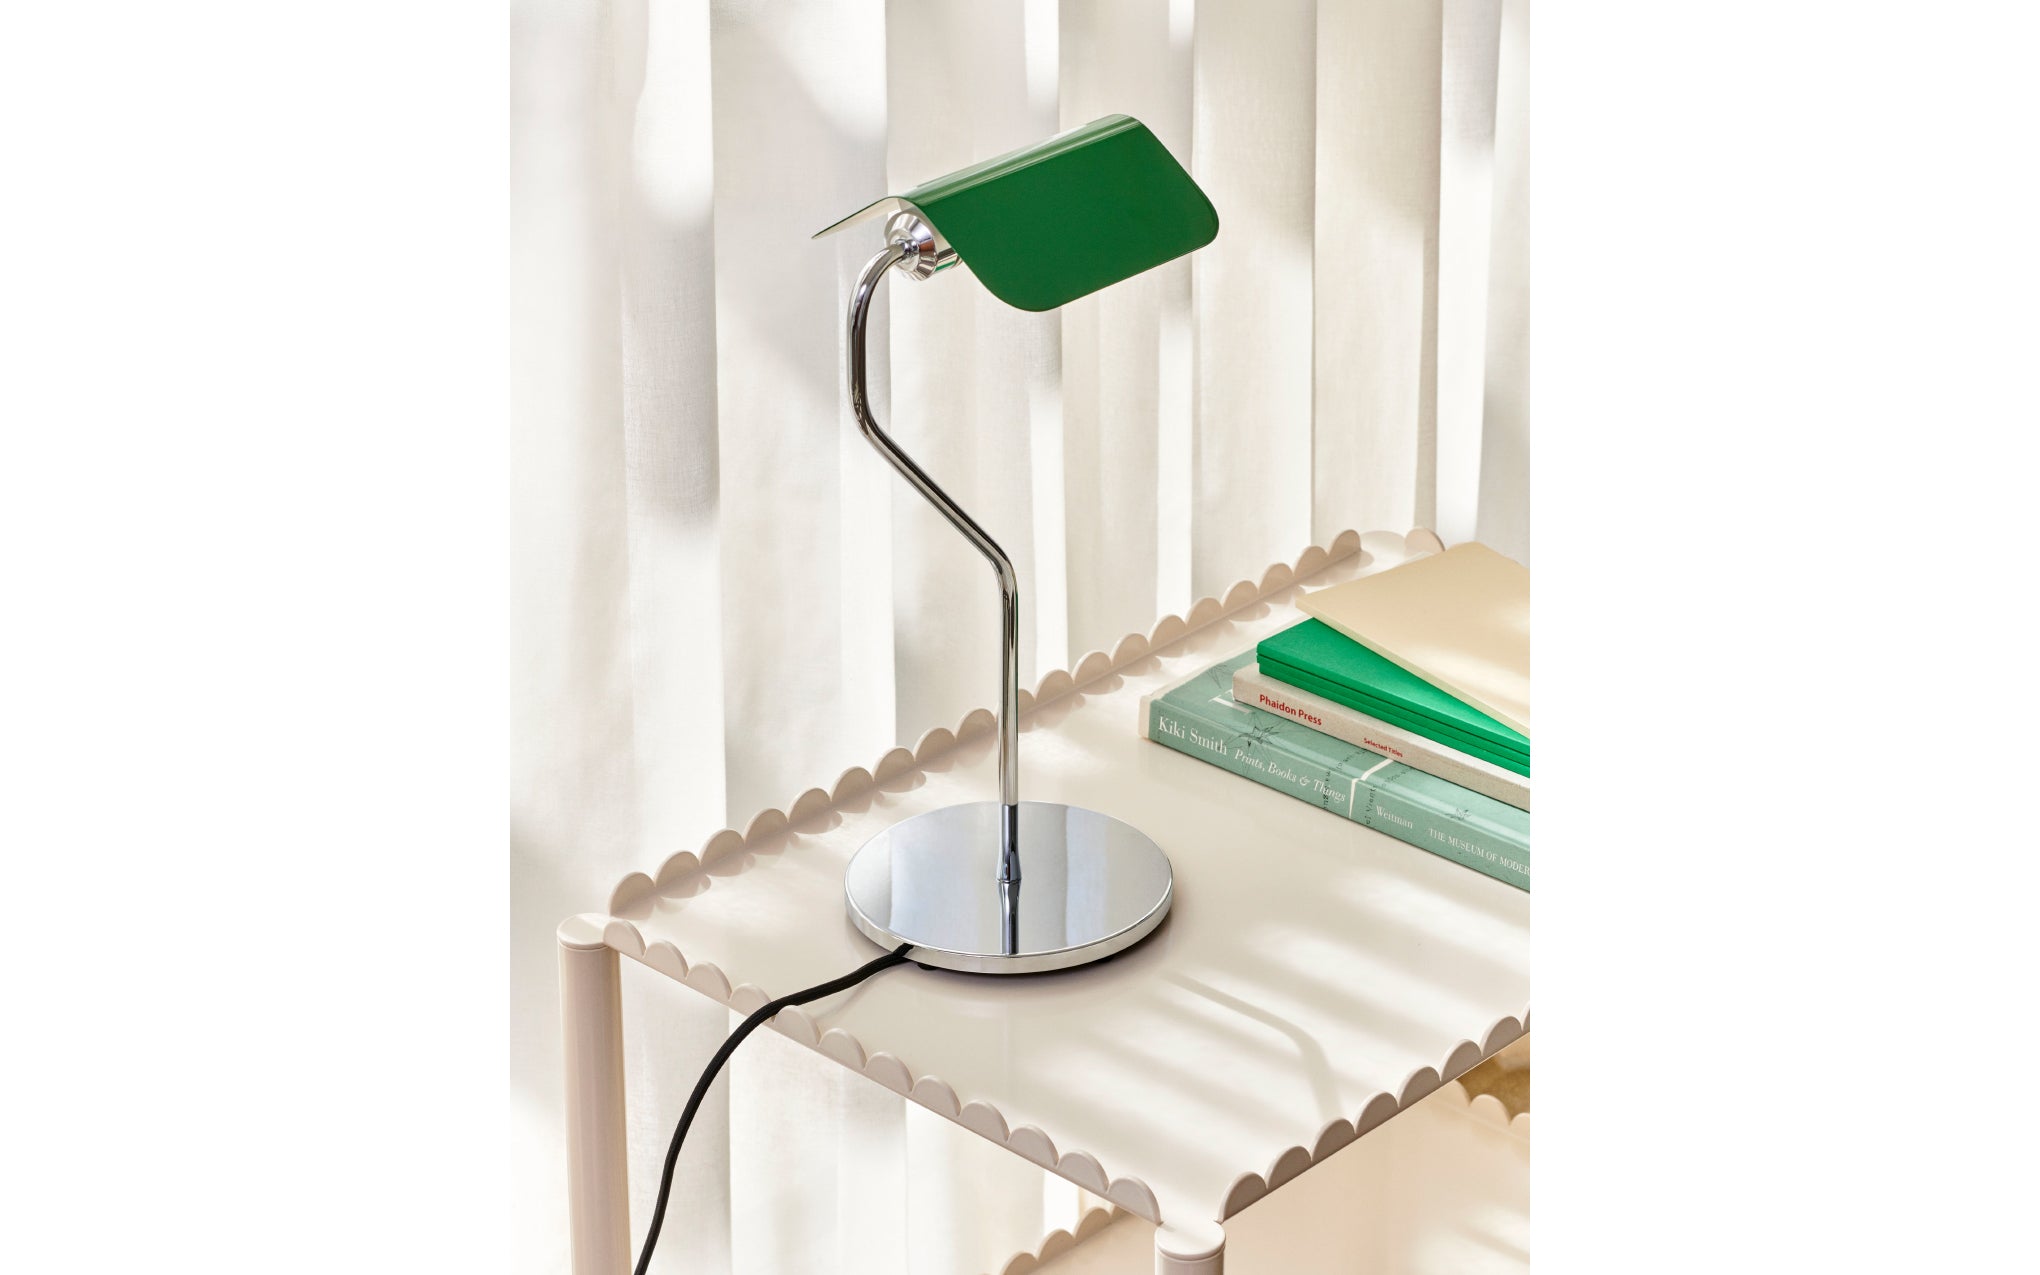 Apex table lamp by John Tree for Hay